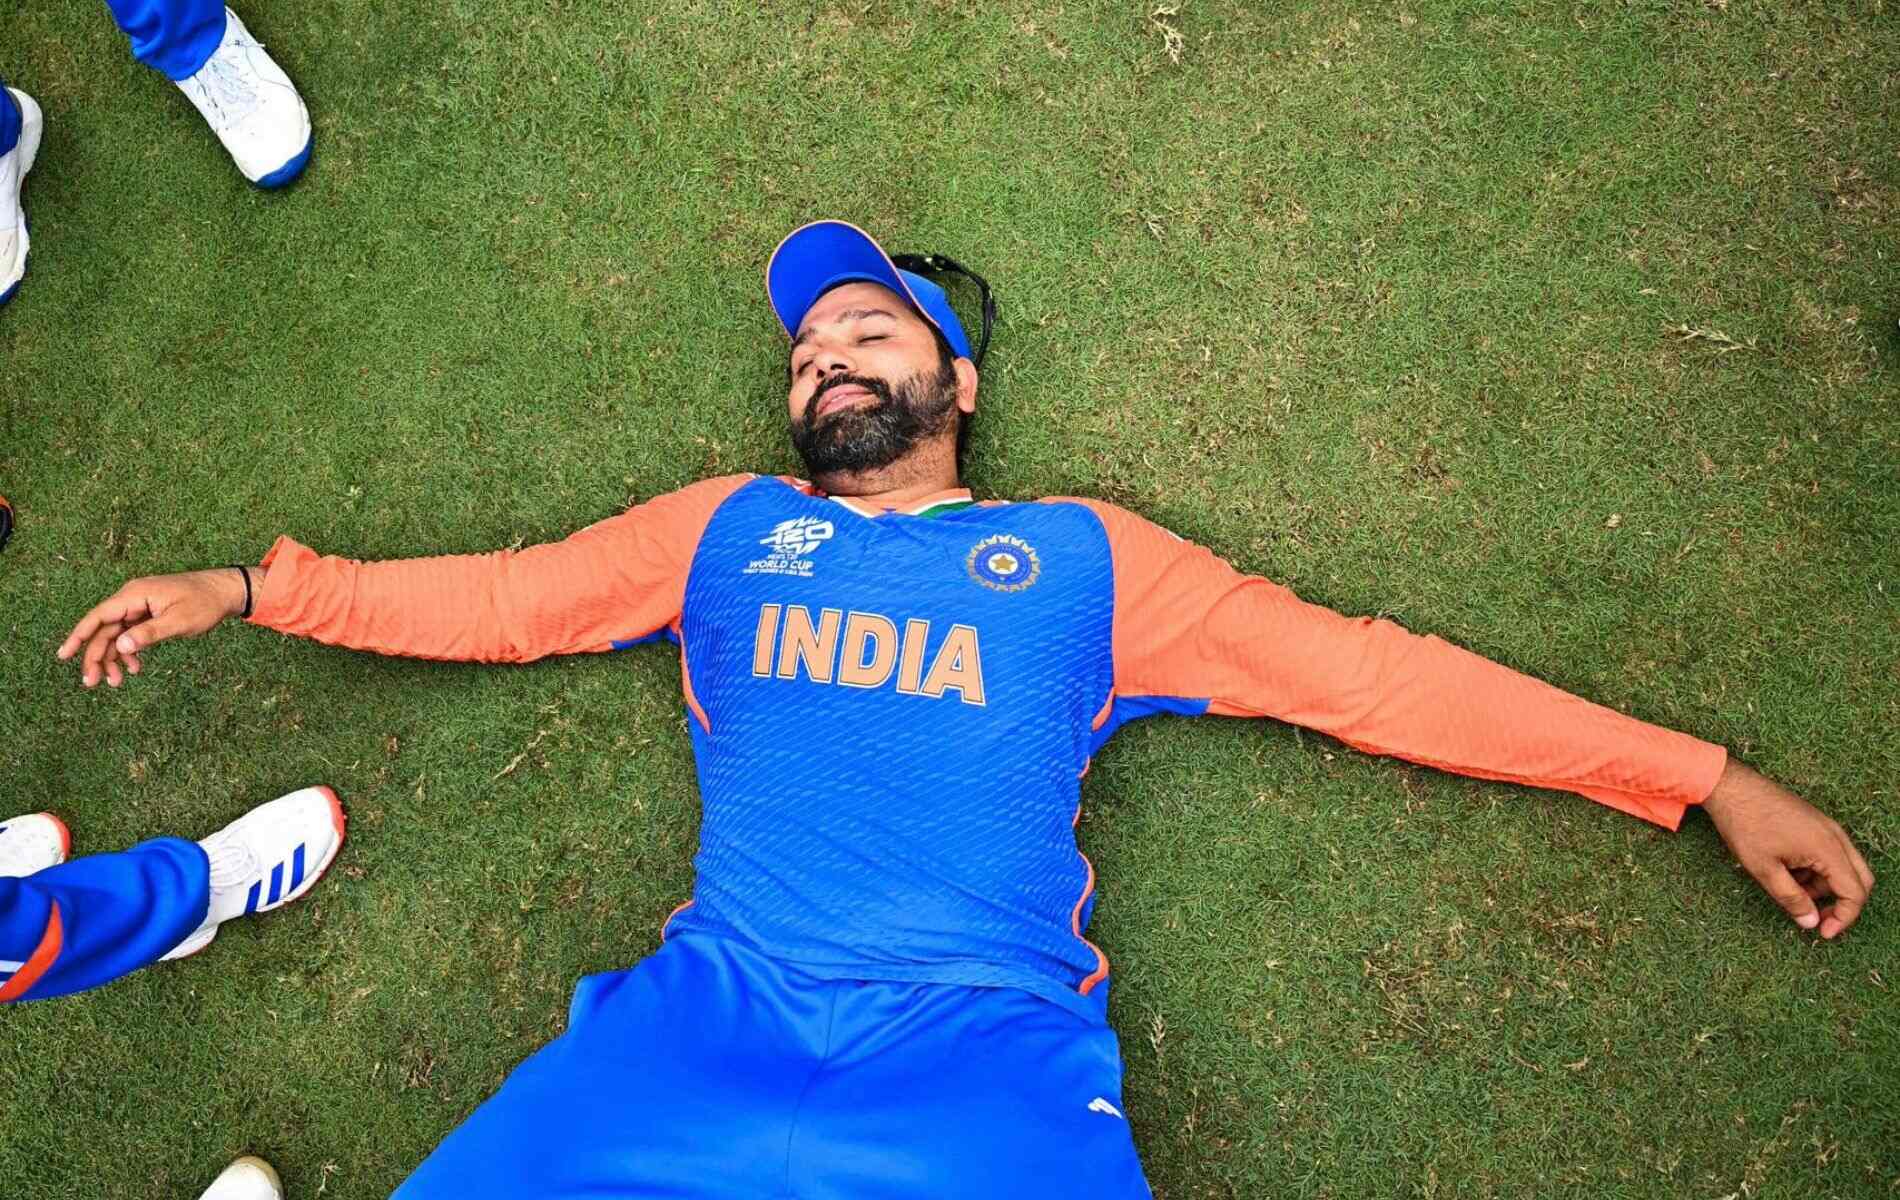 'This Picture Epitomises How...': Rohit Posts Emotional Reflection On Viral World Cup Victory Image